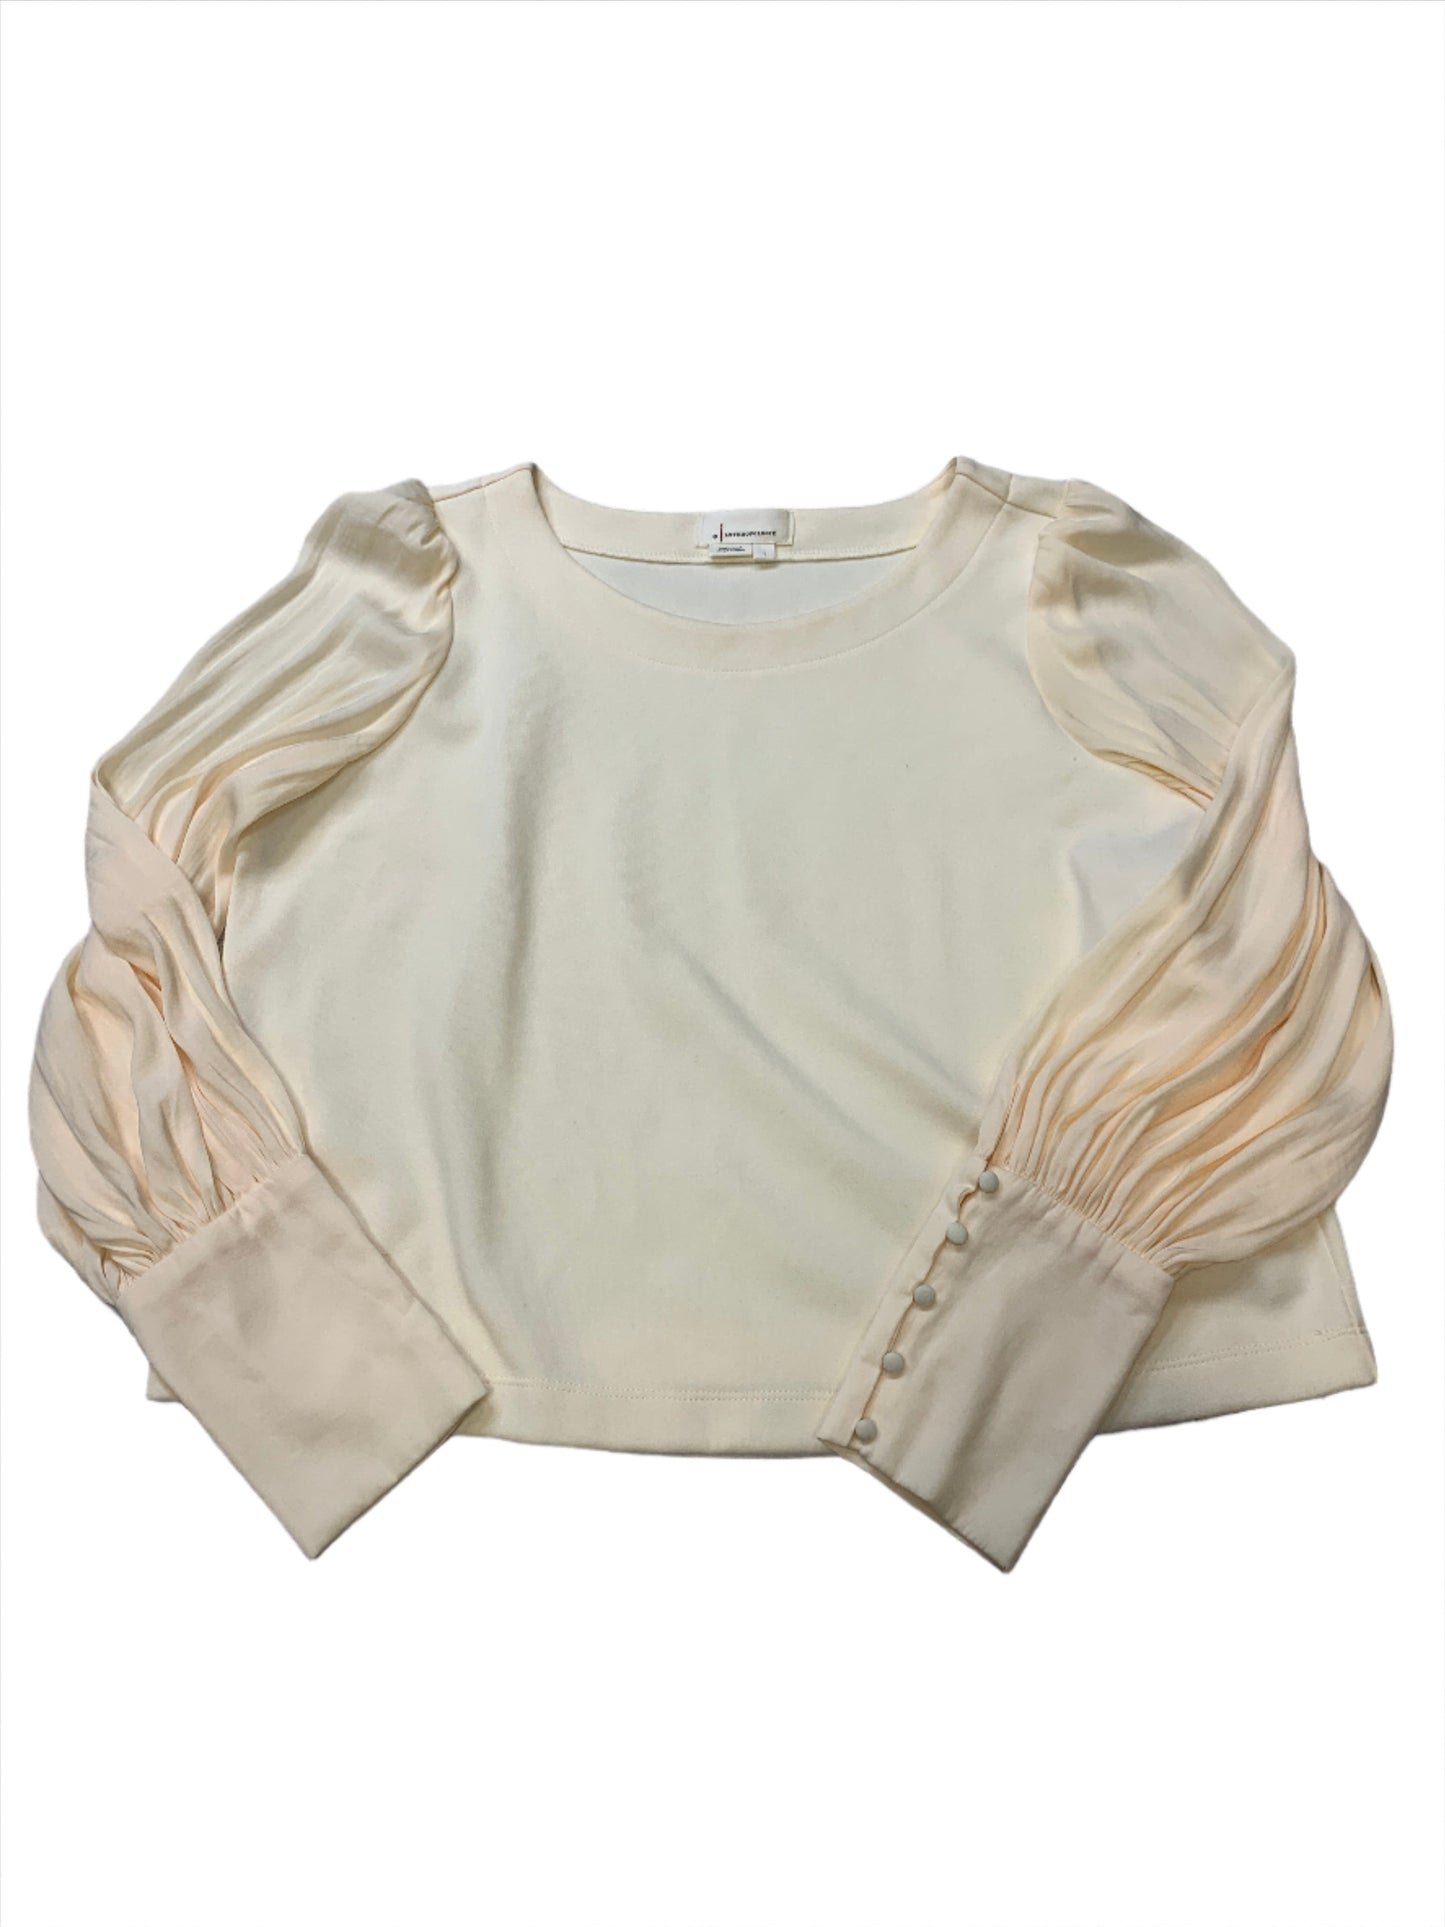 Cream Top Long Sleeve Anthropologie, Size L